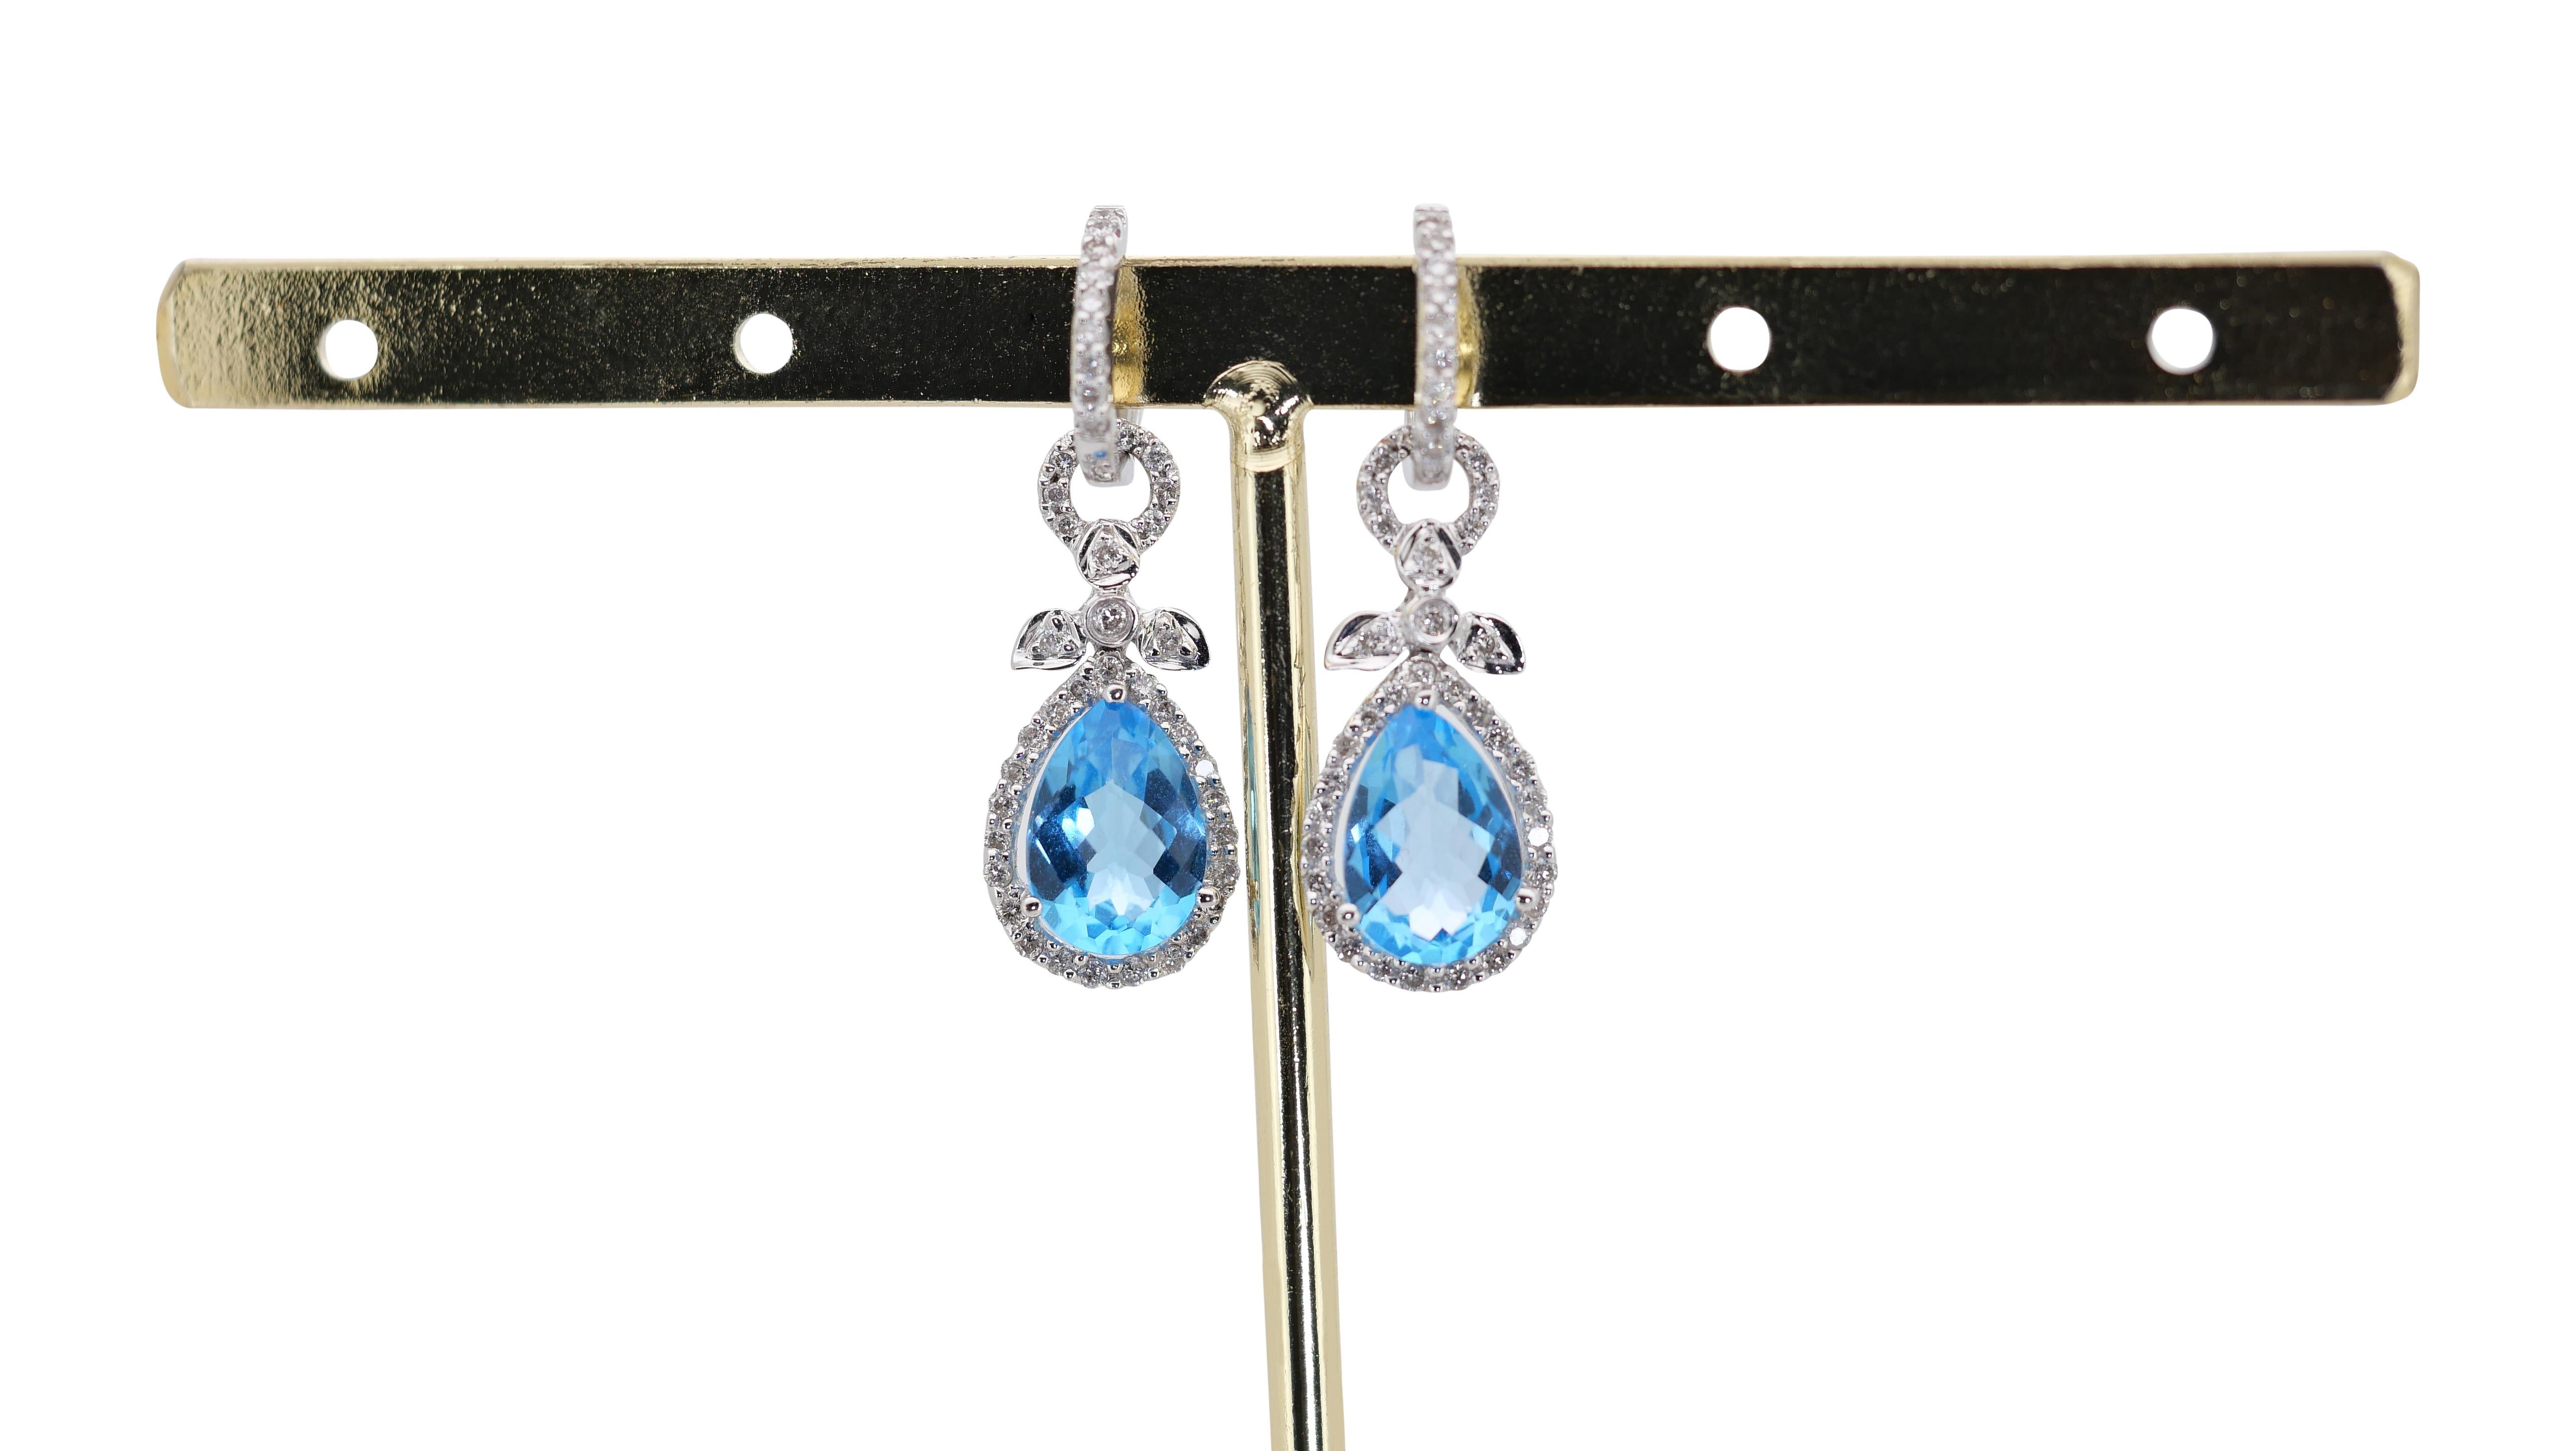 A stunning pair of dangle earrings with a dazzling 4.36 carat pear shape natural topaz. It has 0.64 carats of side diamonds which add more to its elegance. The jewelry is made of 18k white gold with a high-quality polish. It comes with a fancy